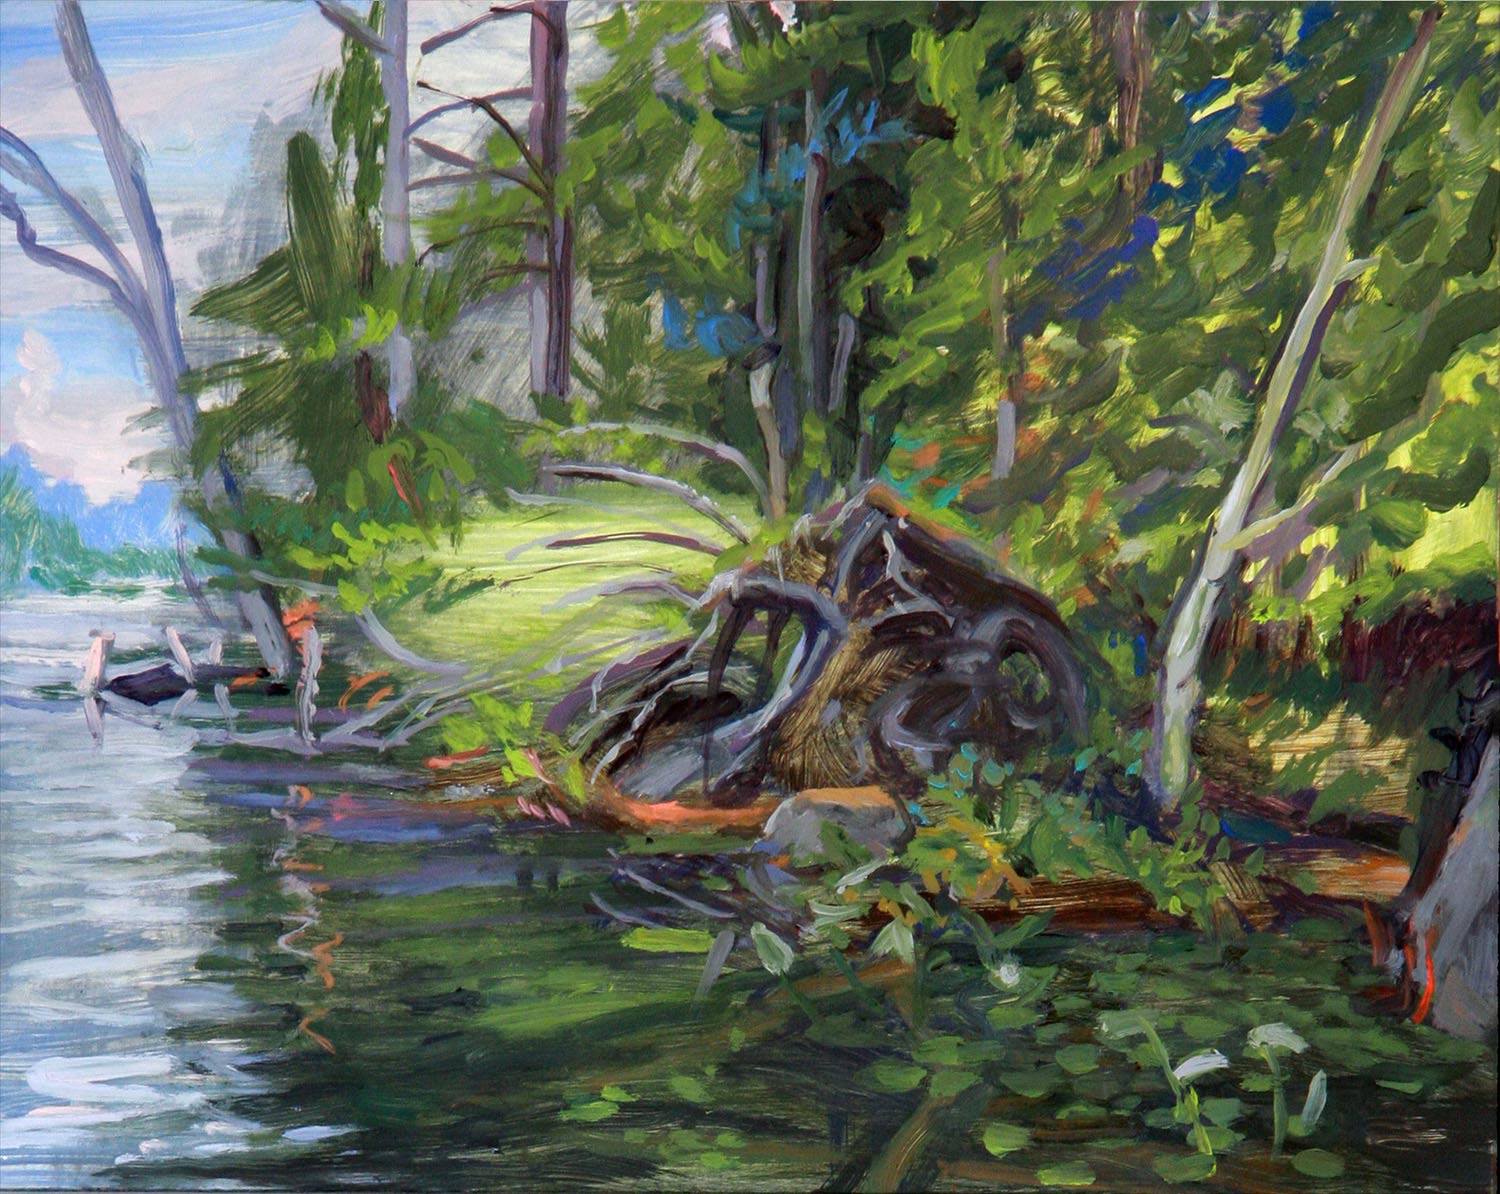 Adirondack shore 11 x 14 in. oil on wood 2016